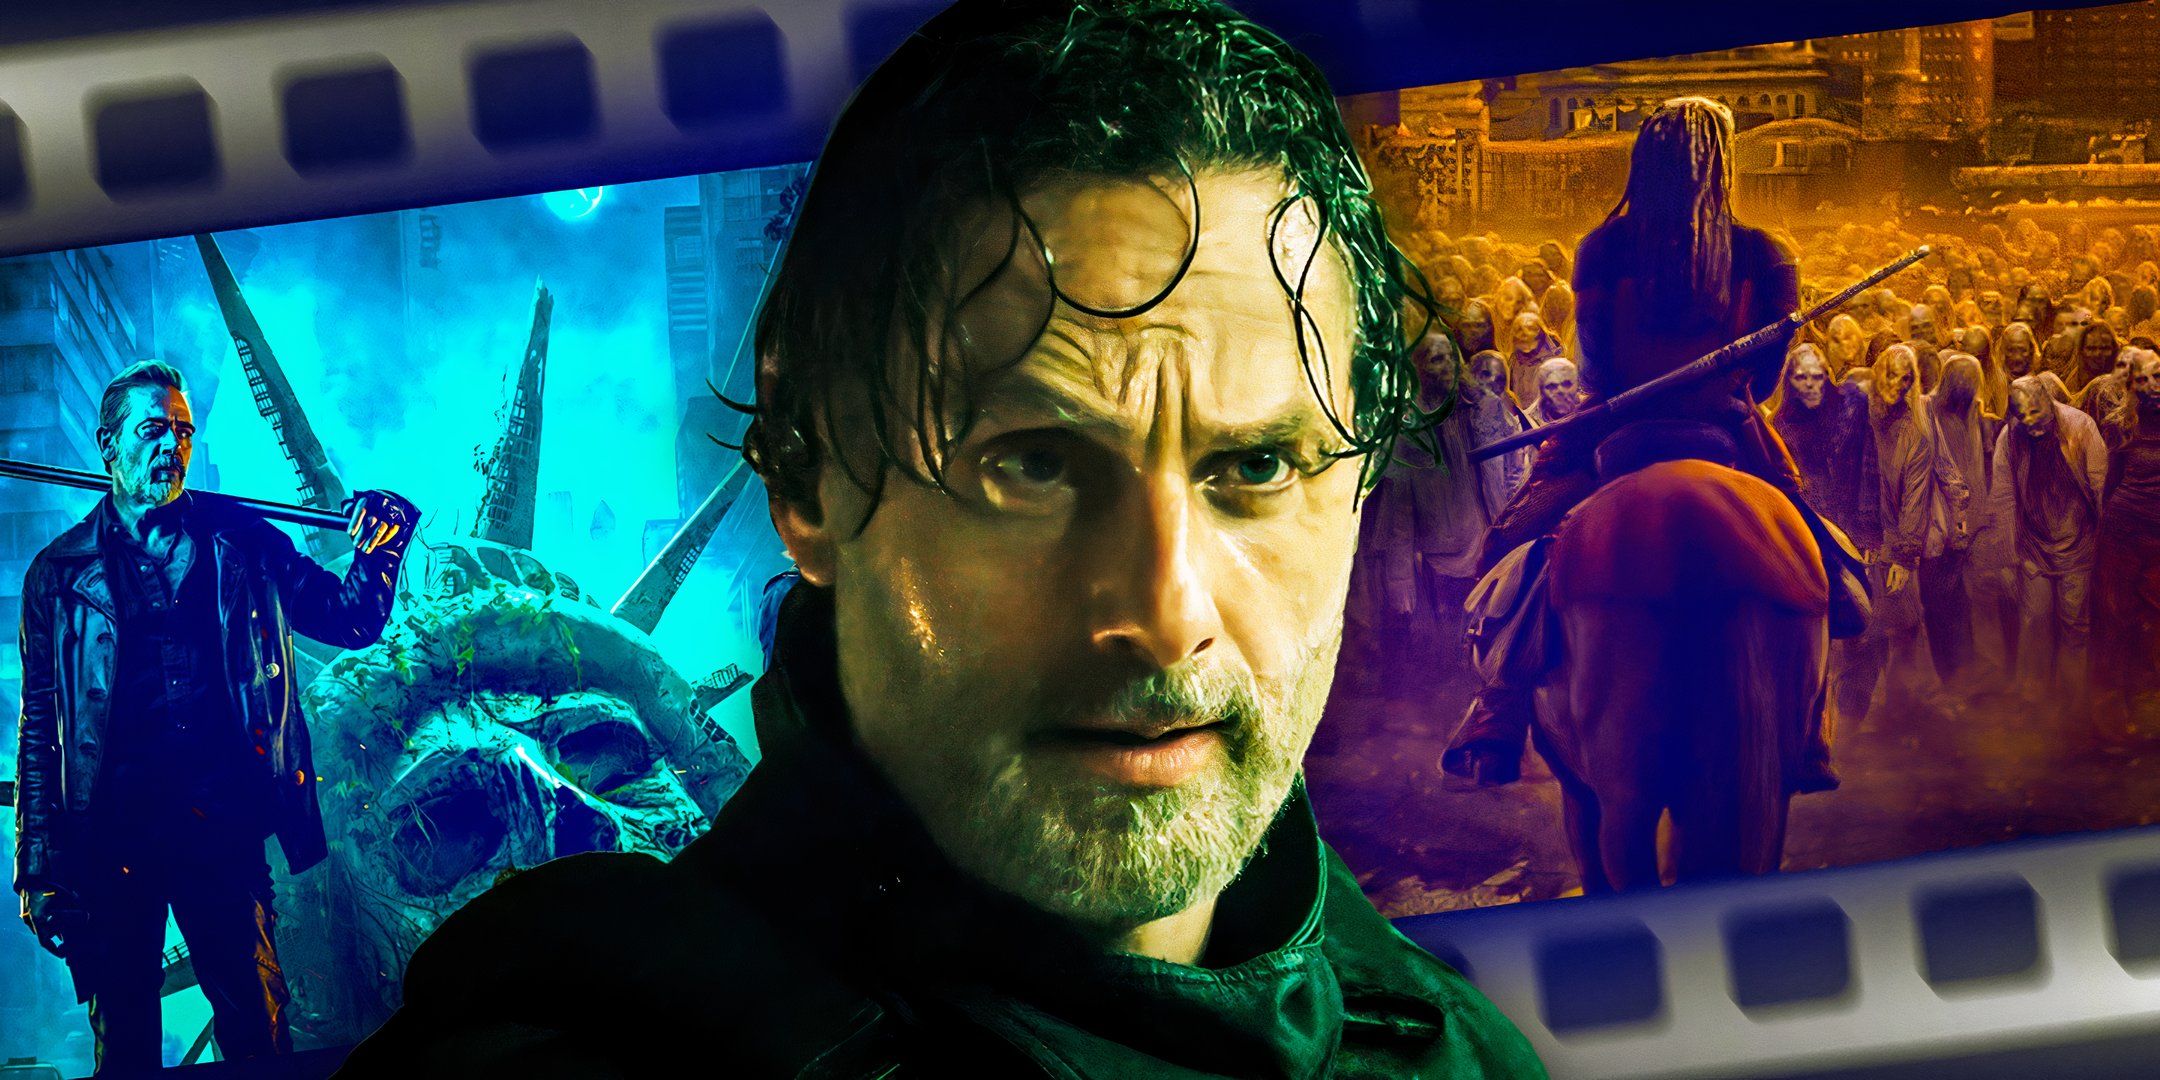 Andrew Lincoln as Rick Grimes next to Jeffrey Dean Morgan as Negan in the Dead City poster and Danai Gurira as Michonne riding a horse in front of a zombie horde